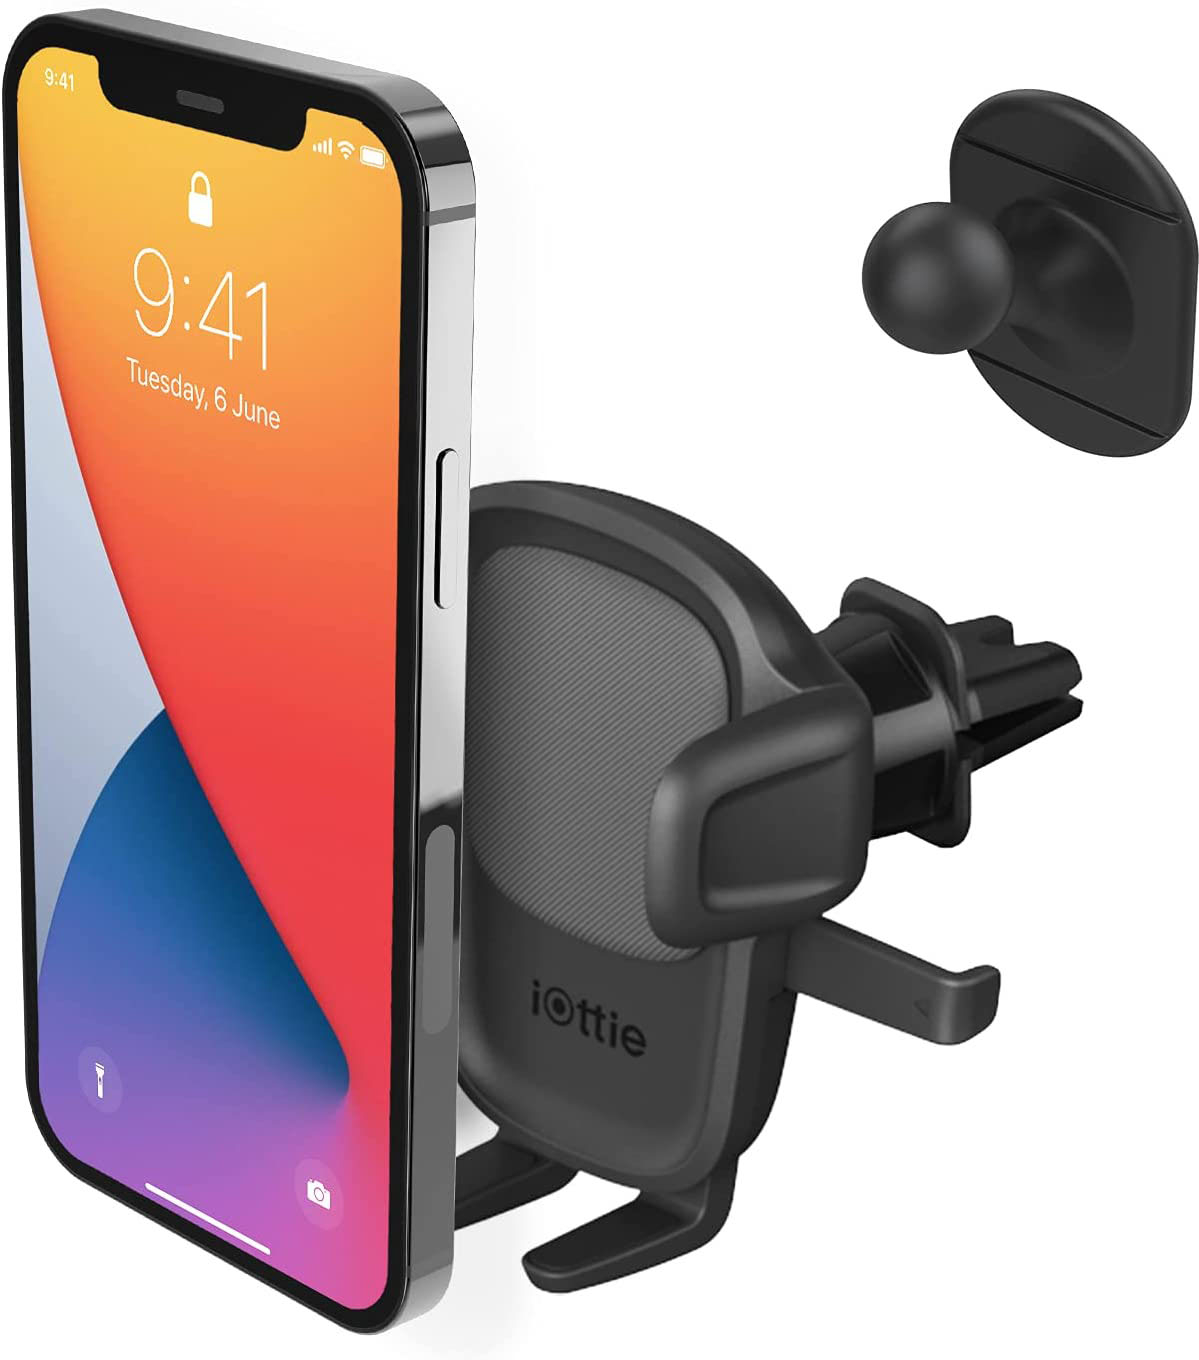 iOttie Easy One Touch 5 CD Slot Mount - Universal Car Phone Holder for  iPhone, Google, Samsung, Moto, Huawei, Nokia, LG, and all other Smartphones